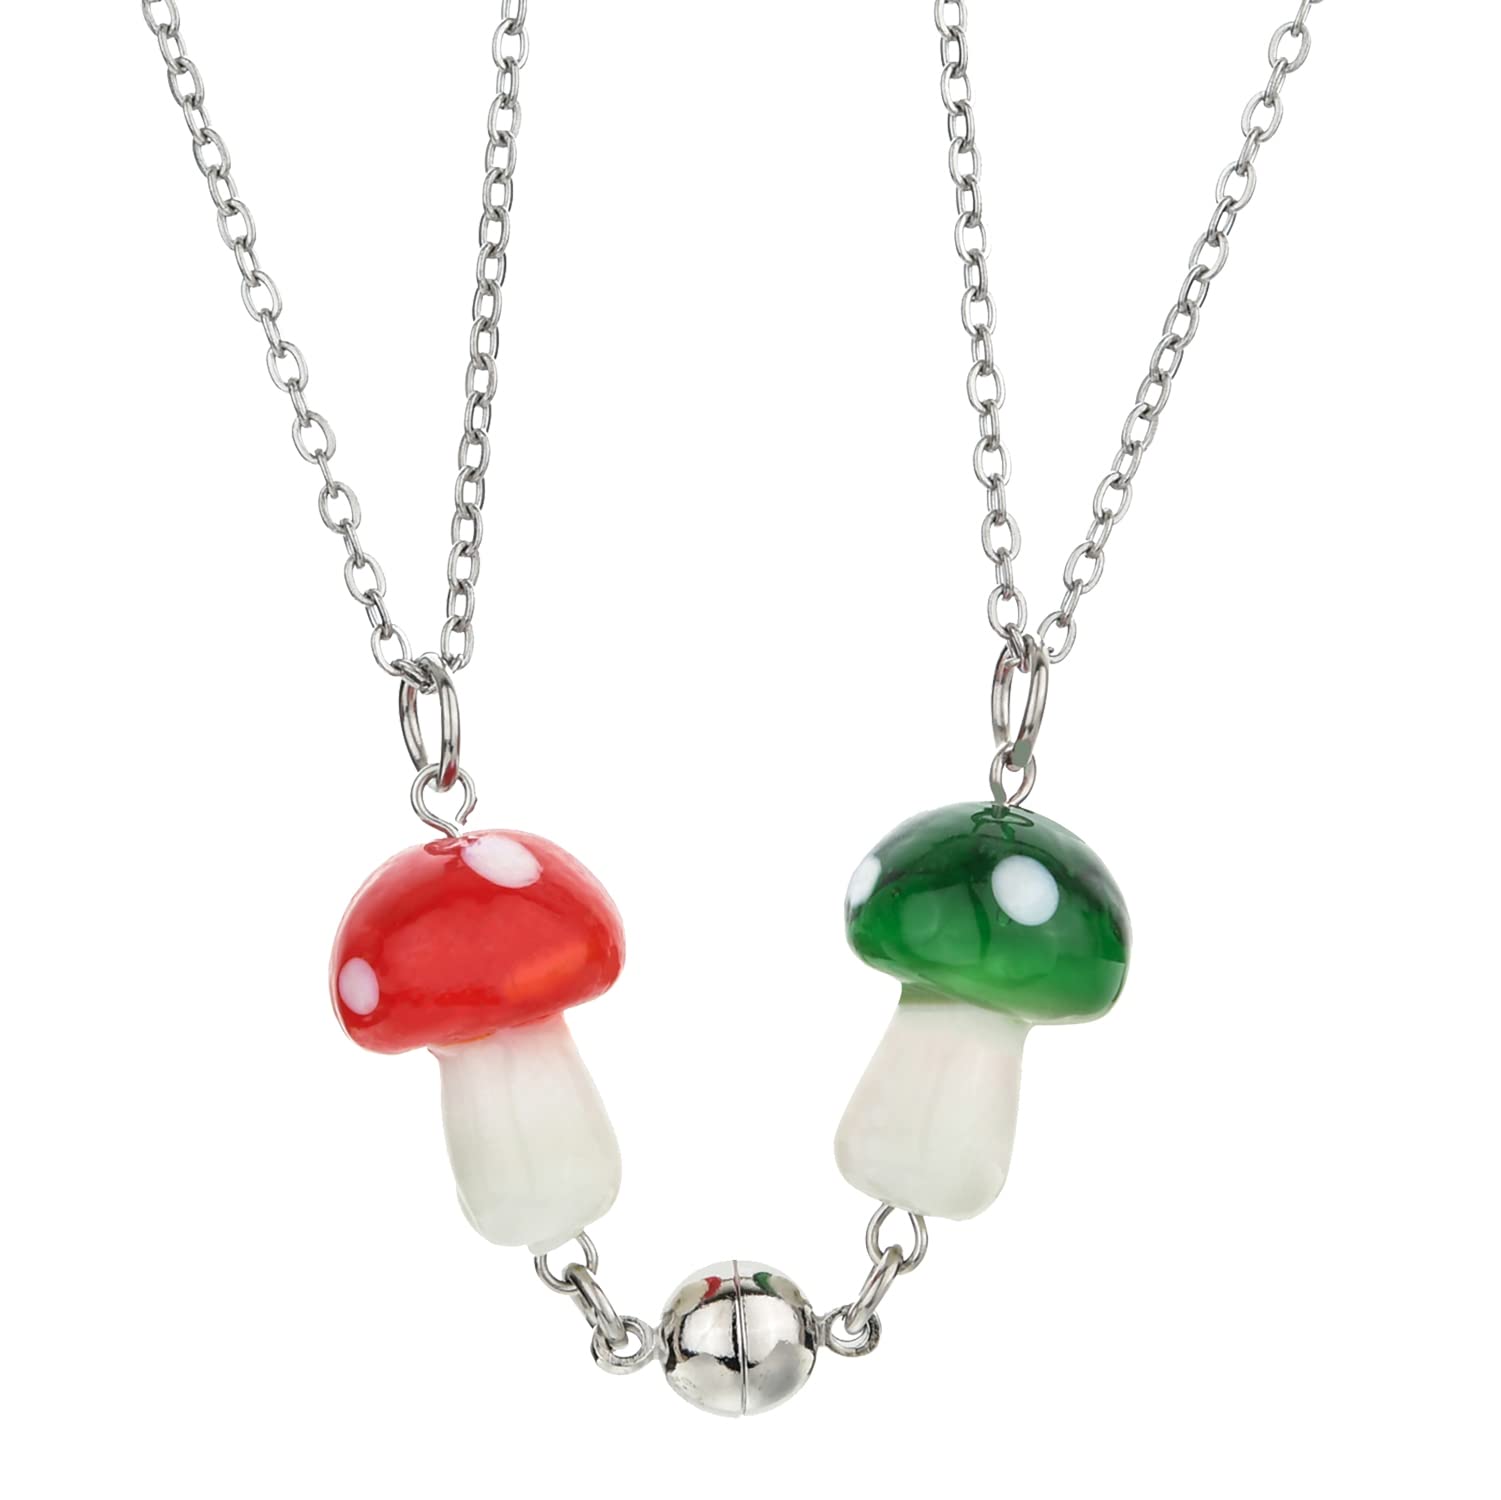 Mushroom One Hitter Necklace with Drawstring Pouch | Pulsar